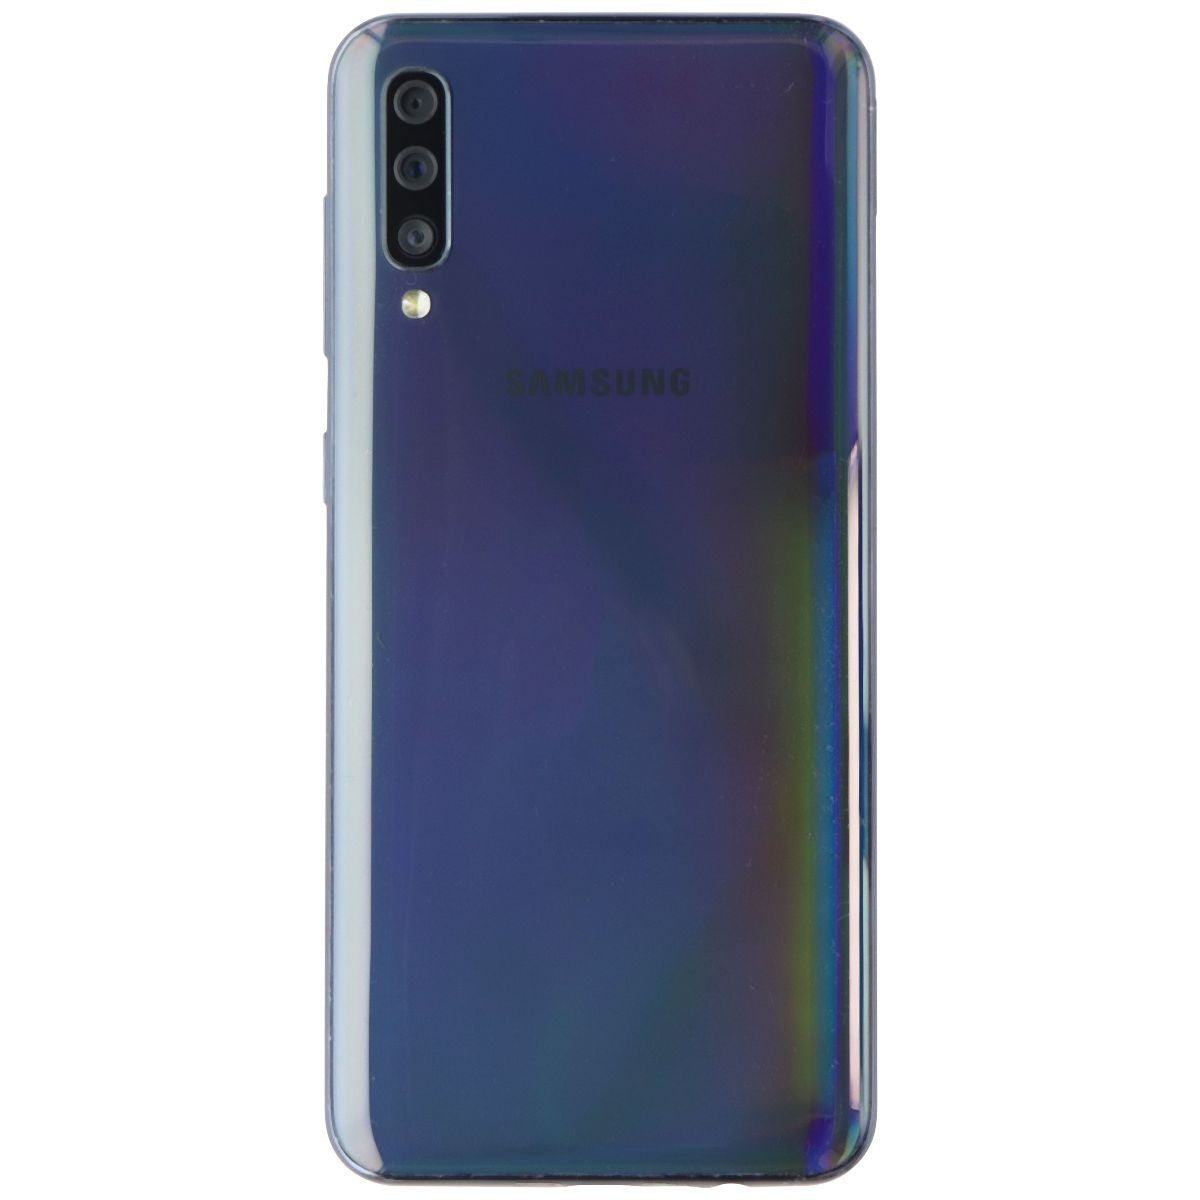 Samsung Galaxy A50 (6.4-in) Smartphone (SM-A505U1) UNLOCKED - 64GB / Black Cell Phones & Smartphones Samsung    - Simple Cell Bulk Wholesale Pricing - USA Seller